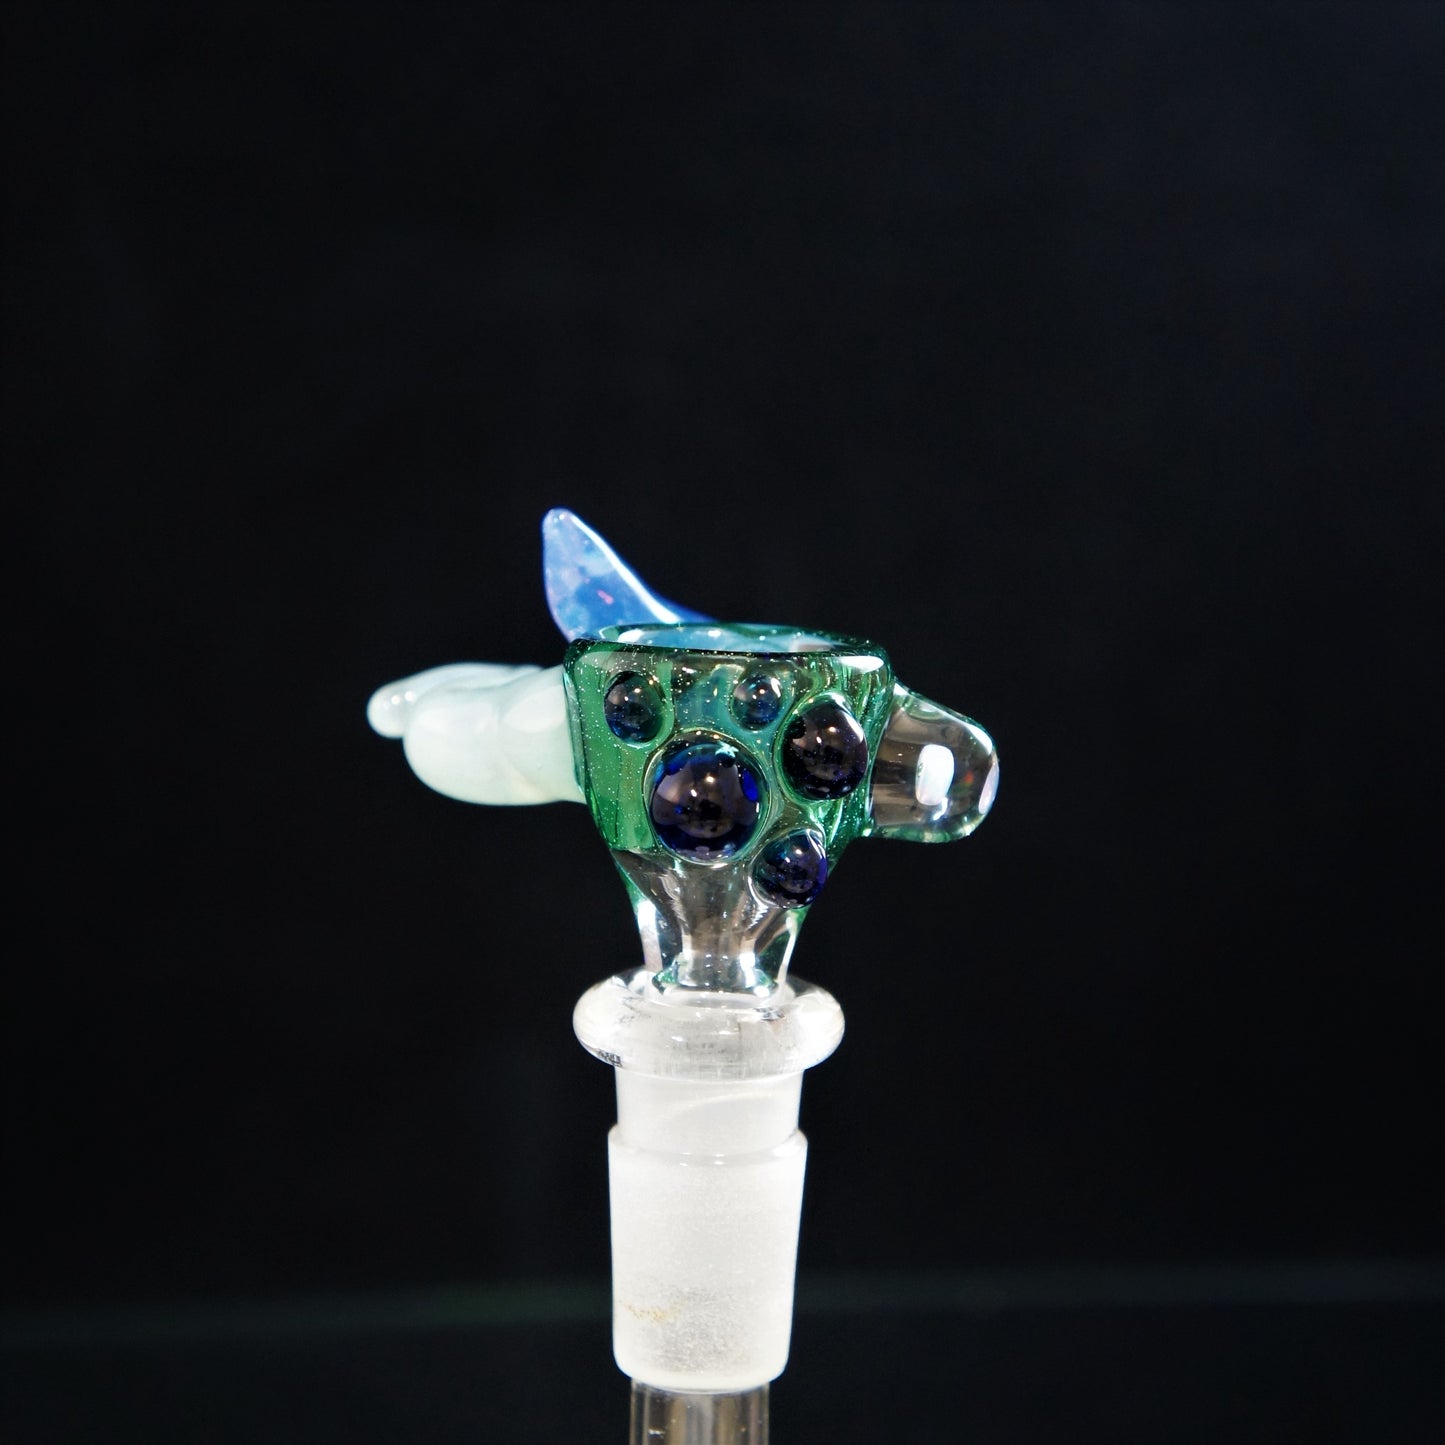 Toque and Dogger Glass - Freestyle Bowl 14mm - 2